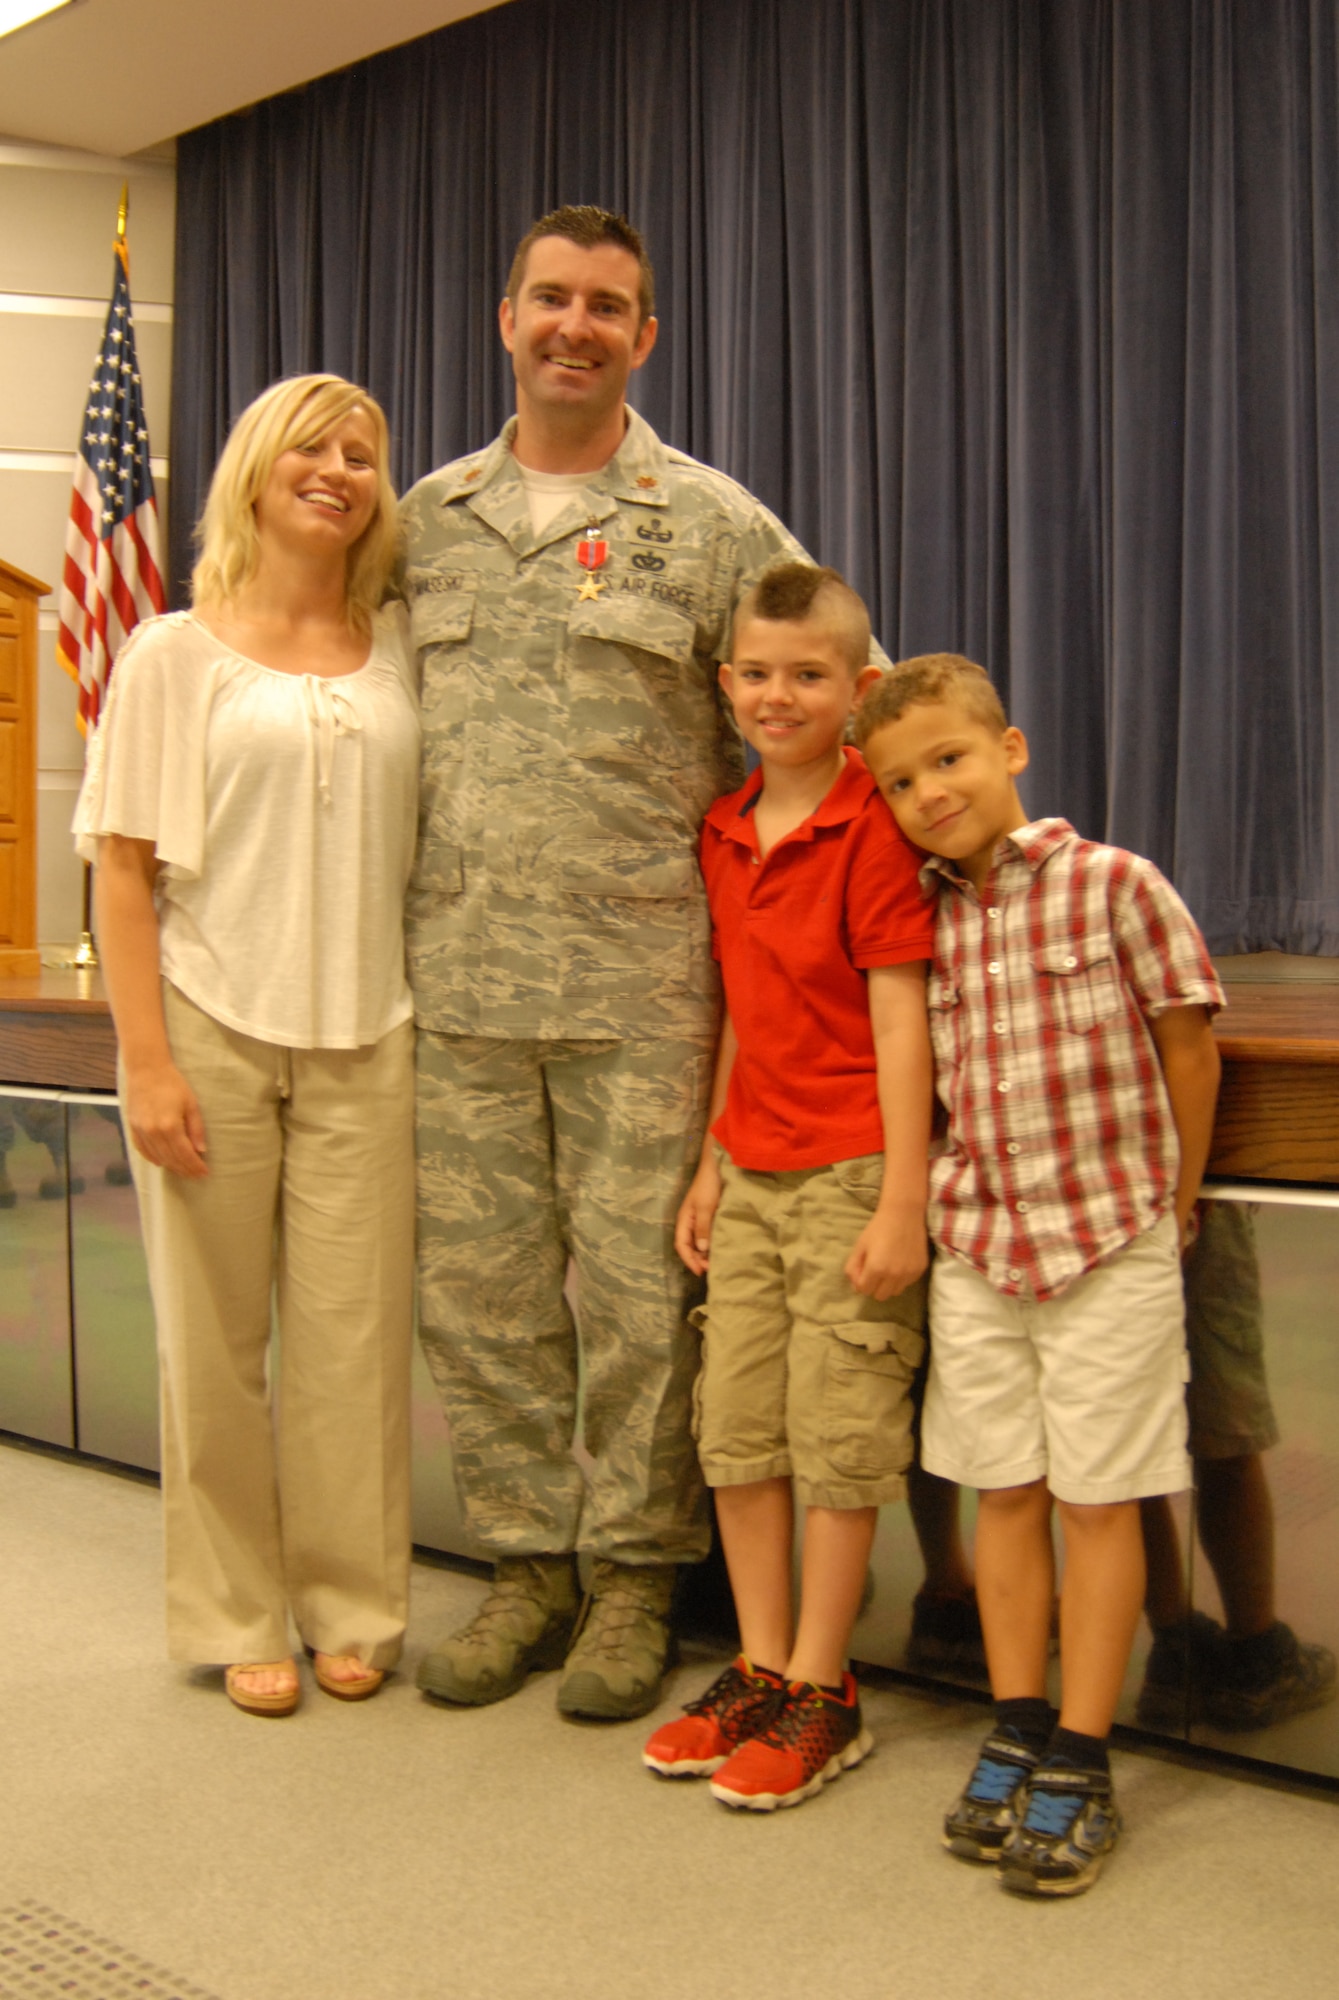 Air Force Maj. Devin Tomaseski, base civil engineer, 166th Civil Engineer Squadron, 166th Airlift Wing, Delaware ANG, with his fiancé, Christie Williams, his son, Xander, and stepson, Justin, after Tomaseski received the Bronze Star medal at a ceremony held at 166th AW HQ, New Castle ANG Base, New Castle, Del. on June 20, 2014. Tomaseski distinguished himself by exceptionally meritorious service while deployed in support of Operation Enduring Freedom in Afghanistan from 2011 to 2012. This is the third Bronze Star medal awarded to Tomaseski. (U.S. Air National Guard photo by Tech. Sgt. Benjamin Matwey)